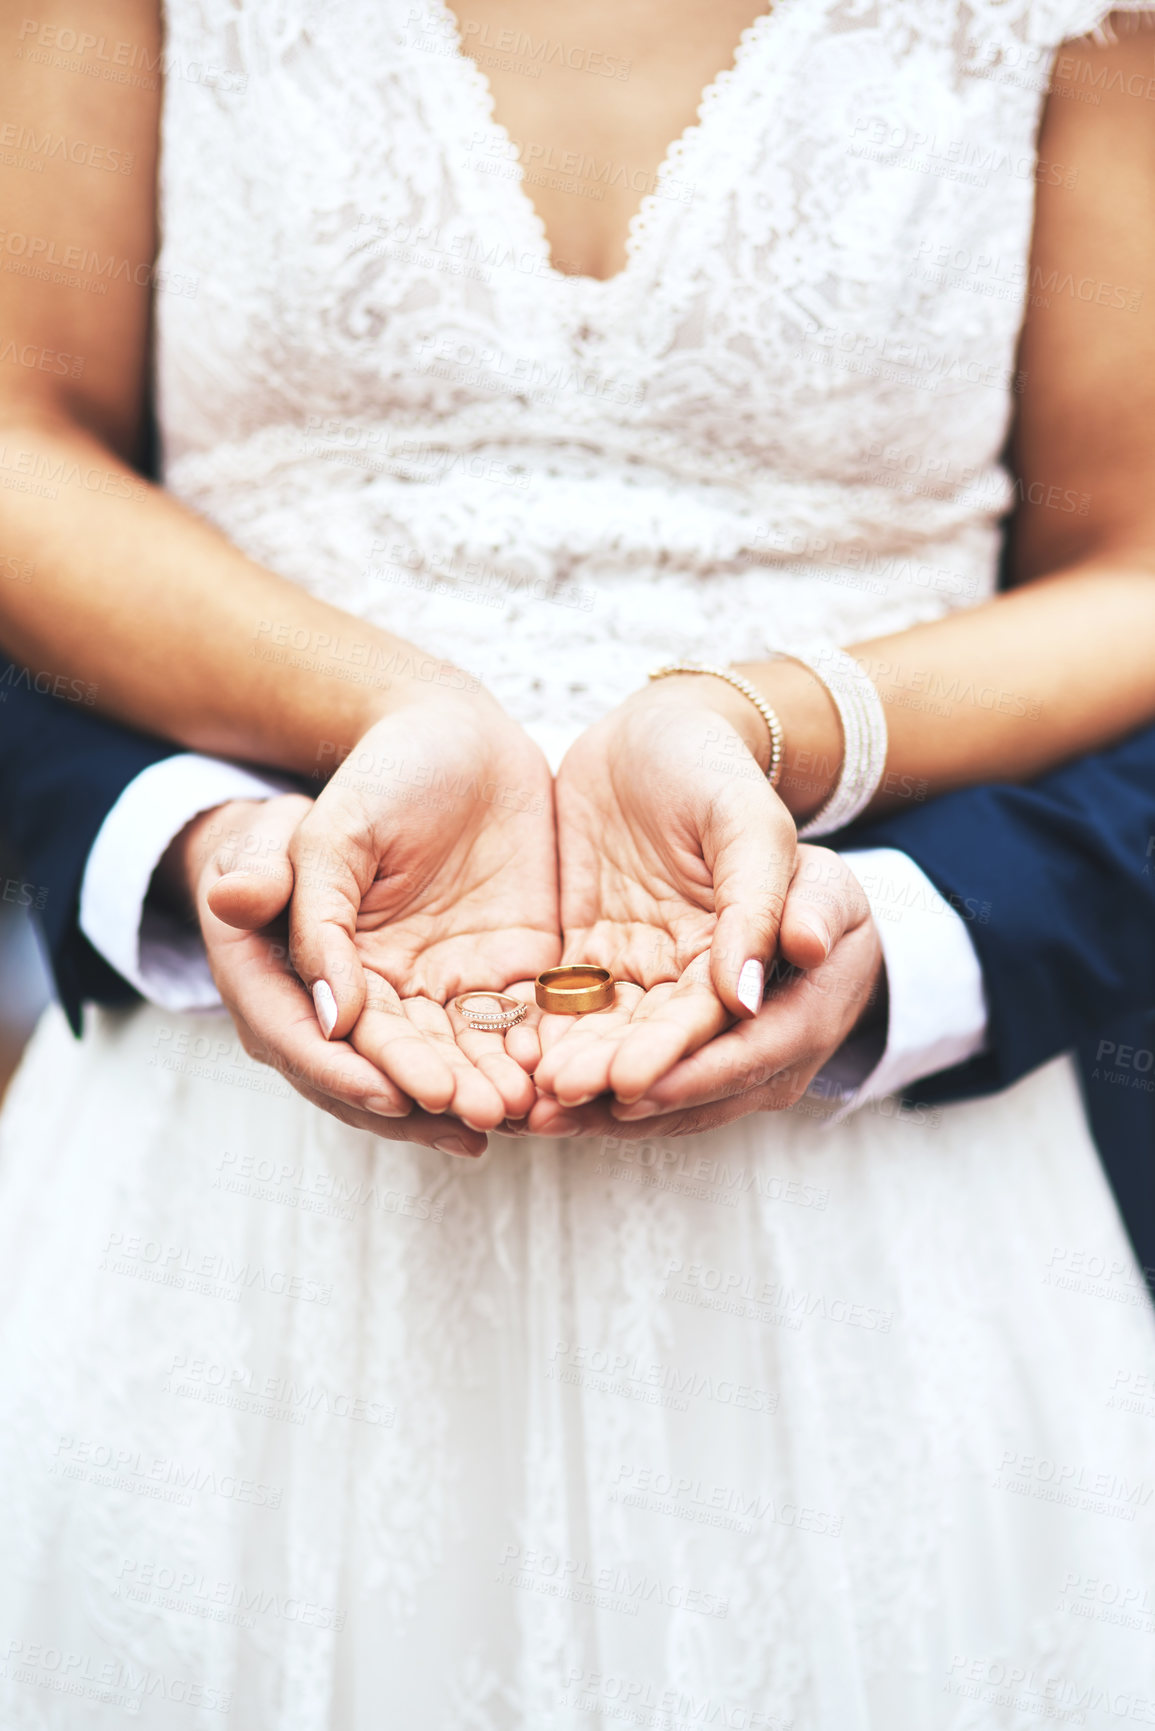 Buy stock photo Cropped shot of an unrecognizable newlywed couple holding and showing their rings on their wedding day